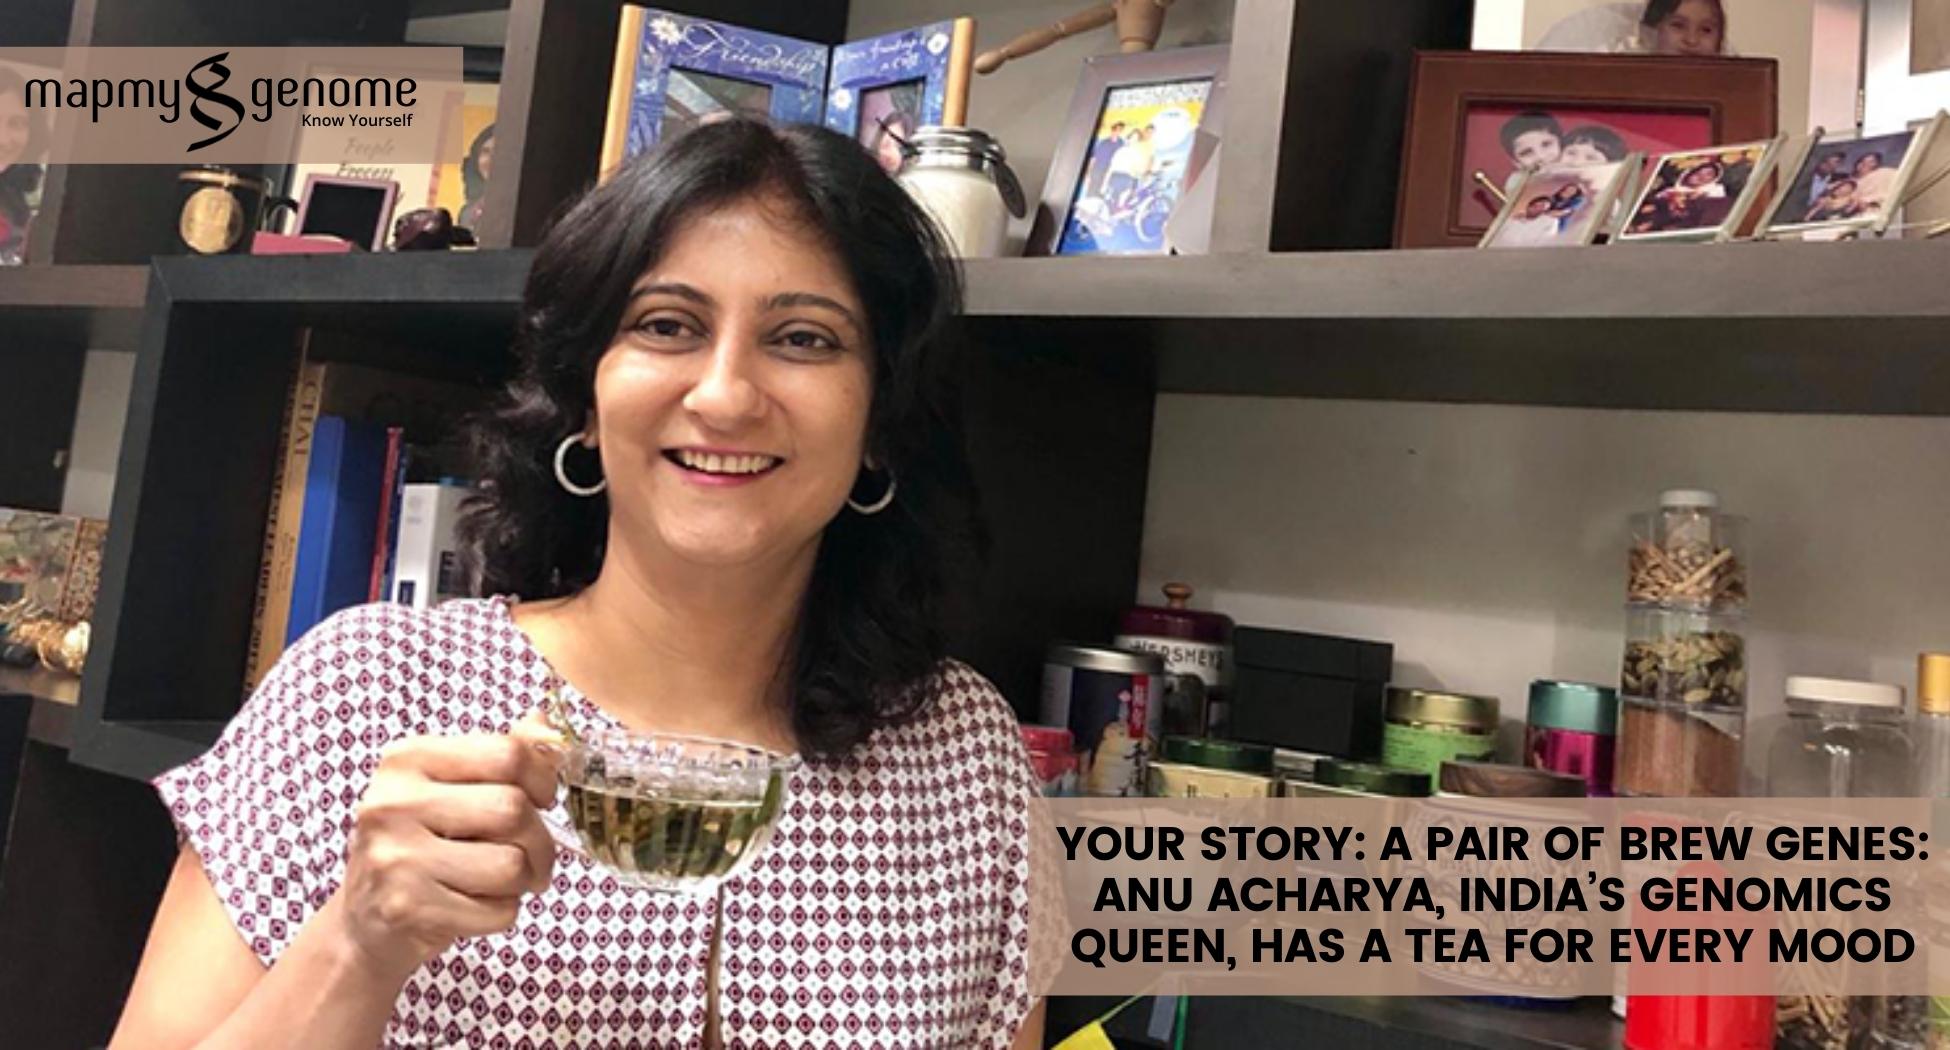 Your story: A pair of brew genes: Anu Acharya, India’s genomics queen, has a tea for every mood